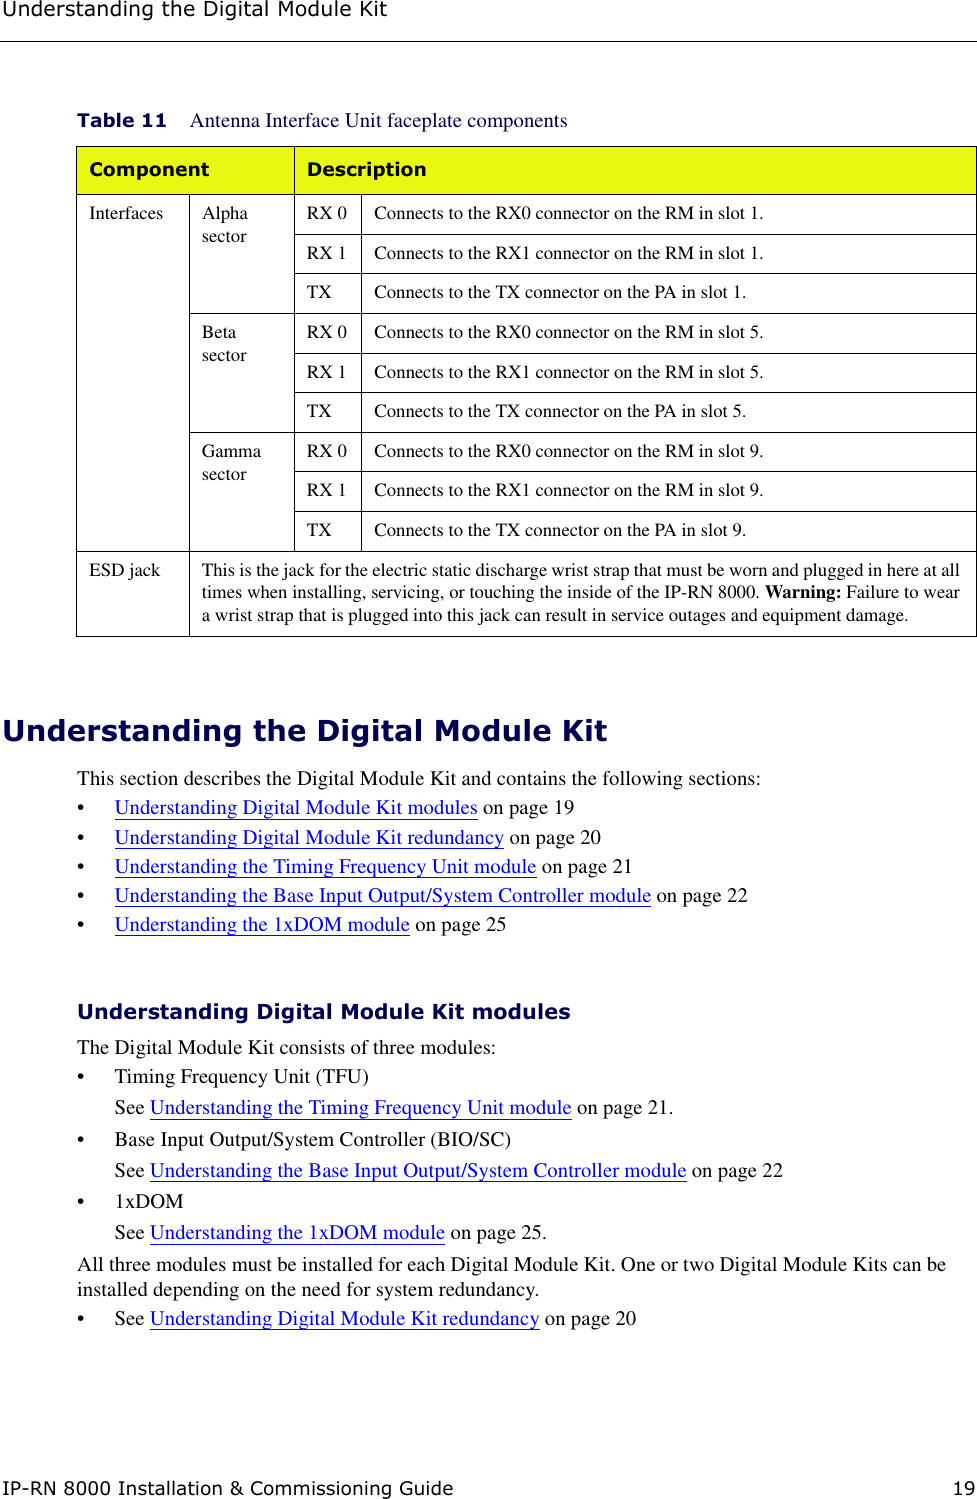 Understanding the Digital Module KitIP-RN 8000 Installation &amp; Commissioning Guide 19Understanding the Digital Module KitThis section describes the Digital Module Kit and contains the following sections:•Understanding Digital Module Kit modules on page 19•Understanding Digital Module Kit redundancy on page 20•Understanding the Timing Frequency Unit module on page 21•Understanding the Base Input Output/System Controller module on page 22•Understanding the 1xDOM module on page 25Understanding Digital Module Kit modulesThe Digital Module Kit consists of three modules:• Timing Frequency Unit (TFU) See Understanding the Timing Frequency Unit module on page 21.• Base Input Output/System Controller (BIO/SC) See Understanding the Base Input Output/System Controller module on page 22• 1xDOMSee Understanding the 1xDOM module on page 25.All three modules must be installed for each Digital Module Kit. One or two Digital Module Kits can be installed depending on the need for system redundancy. • See Understanding Digital Module Kit redundancy on page 20Table 11 Antenna Interface Unit faceplate componentsComponent DescriptionInterfaces Alpha sectorRX 0 Connects to the RX0 connector on the RM in slot 1.RX 1 Connects to the RX1 connector on the RM in slot 1.TX Connects to the TX connector on the PA in slot 1.Beta sectorRX 0 Connects to the RX0 connector on the RM in slot 5.RX 1 Connects to the RX1 connector on the RM in slot 5.TX Connects to the TX connector on the PA in slot 5.Gamma sectorRX 0 Connects to the RX0 connector on the RM in slot 9.RX 1 Connects to the RX1 connector on the RM in slot 9.TX Connects to the TX connector on the PA in slot 9.ESD jack This is the jack for the electric static discharge wrist strap that must be worn and plugged in here at all times when installing, servicing, or touching the inside of the IP-RN 8000. Warning: Failure to wear a wrist strap that is plugged into this jack can result in service outages and equipment damage.